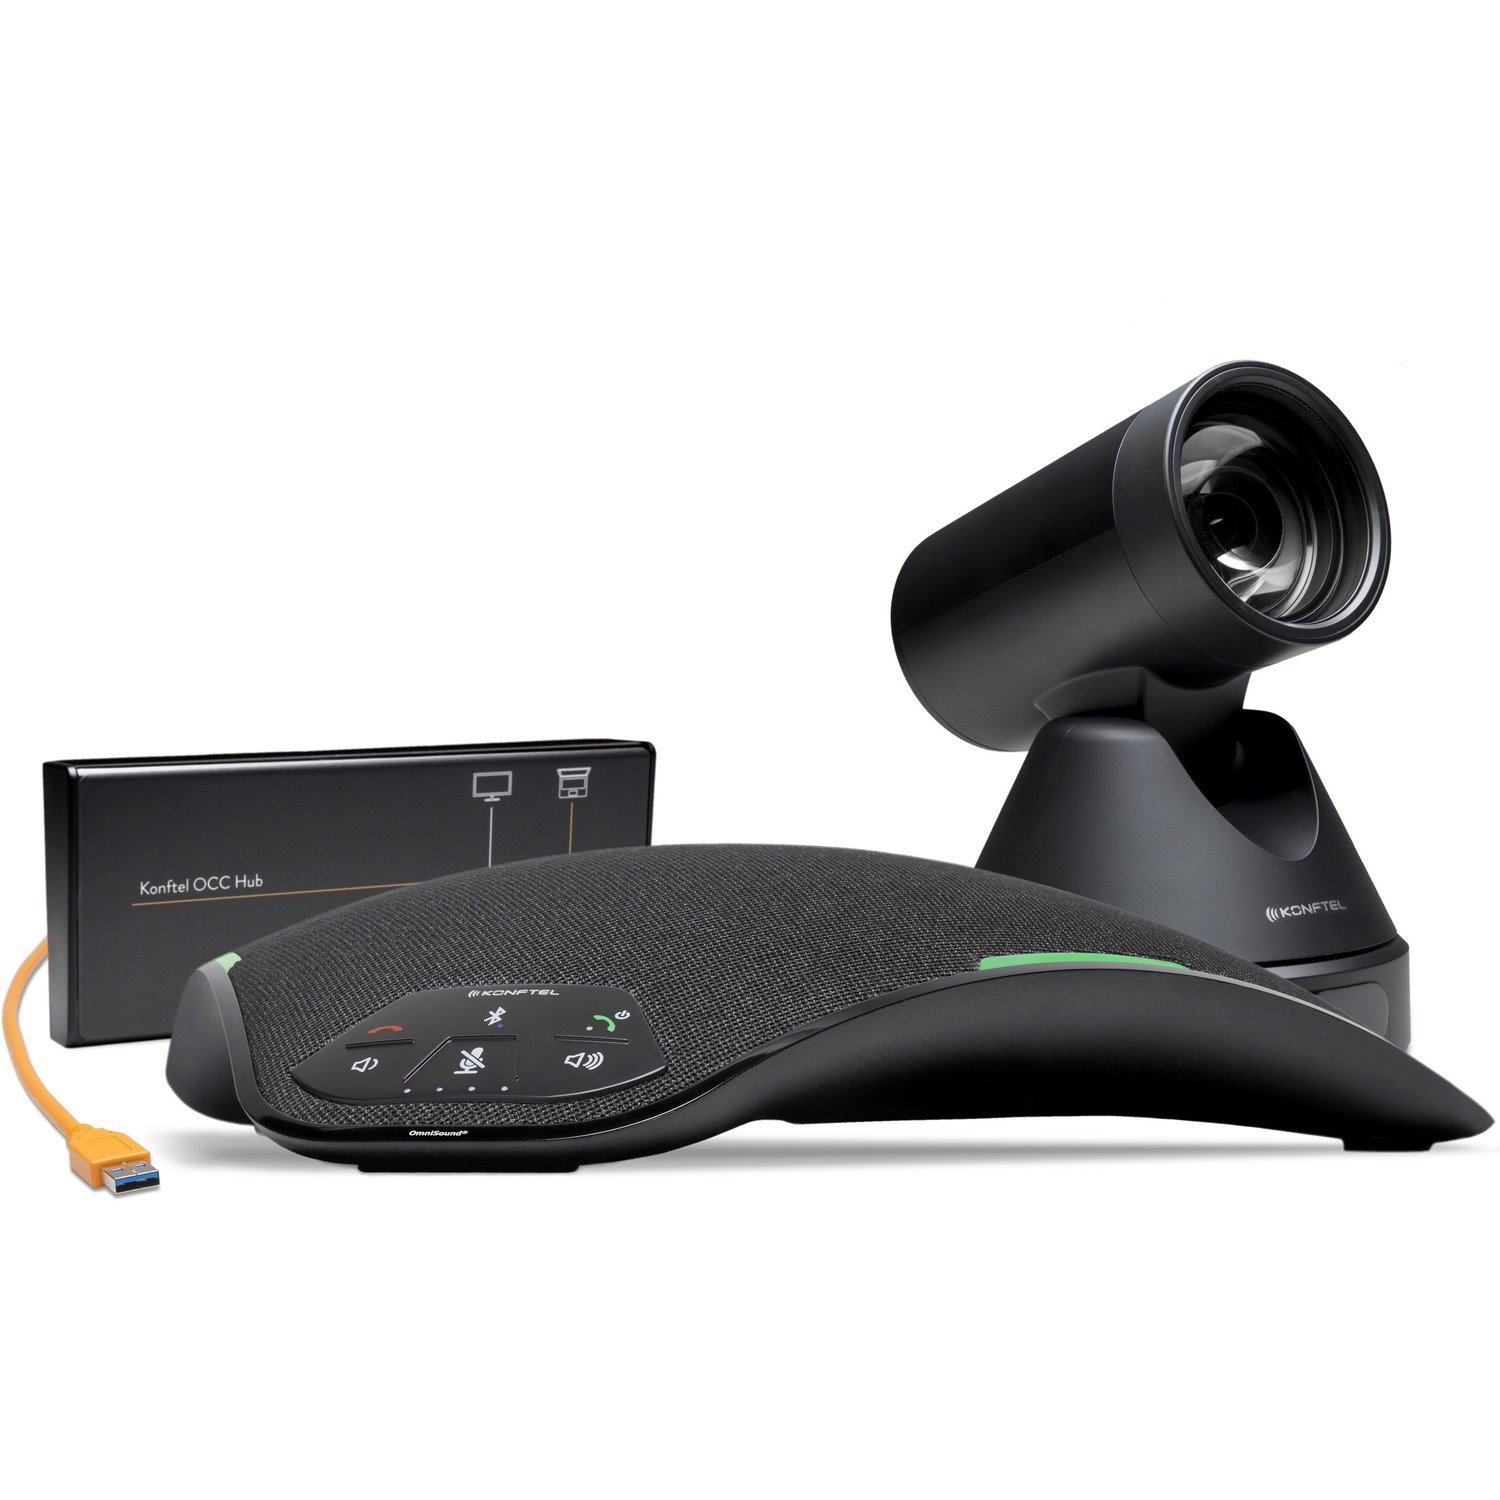 Konftel C5070 (US) - Room type: Small to Medium - Exceptional image quality - HD 1080p 60fps - 12x optical zoom - One Cable Connection Hub - OmniSound&reg; lifelike audio